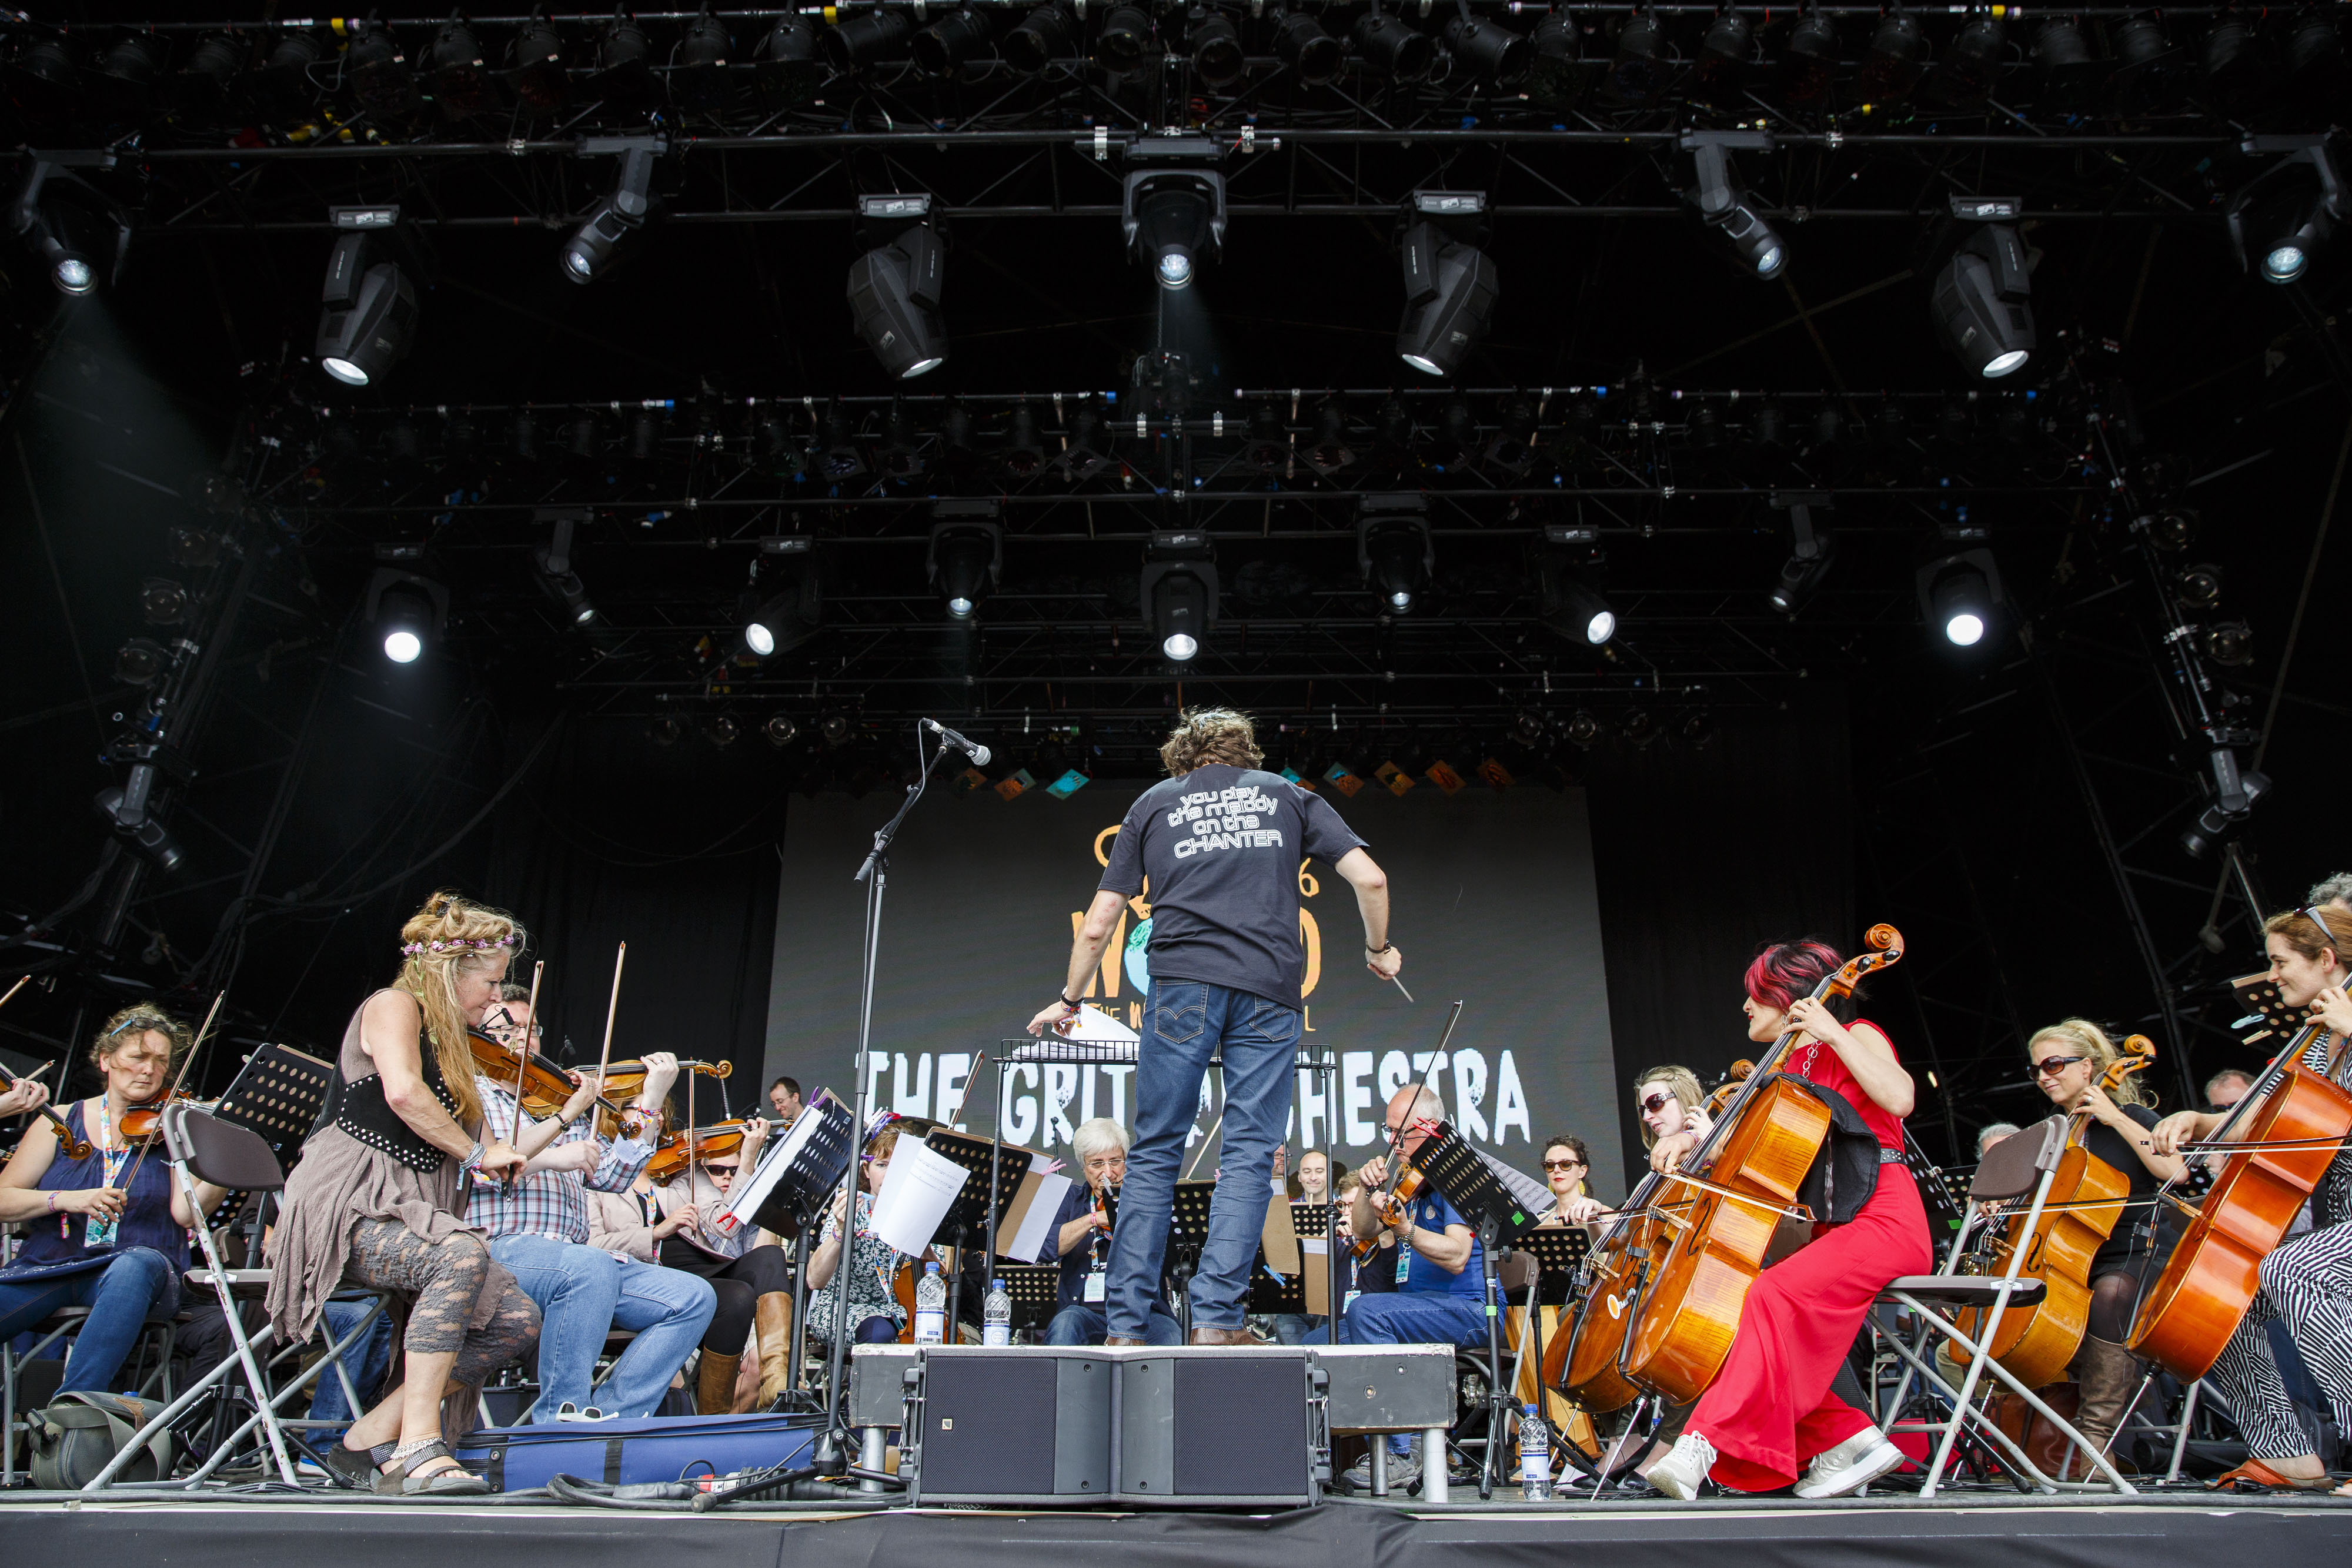 WOMAD Festival 2016 - The Grit Orchestra